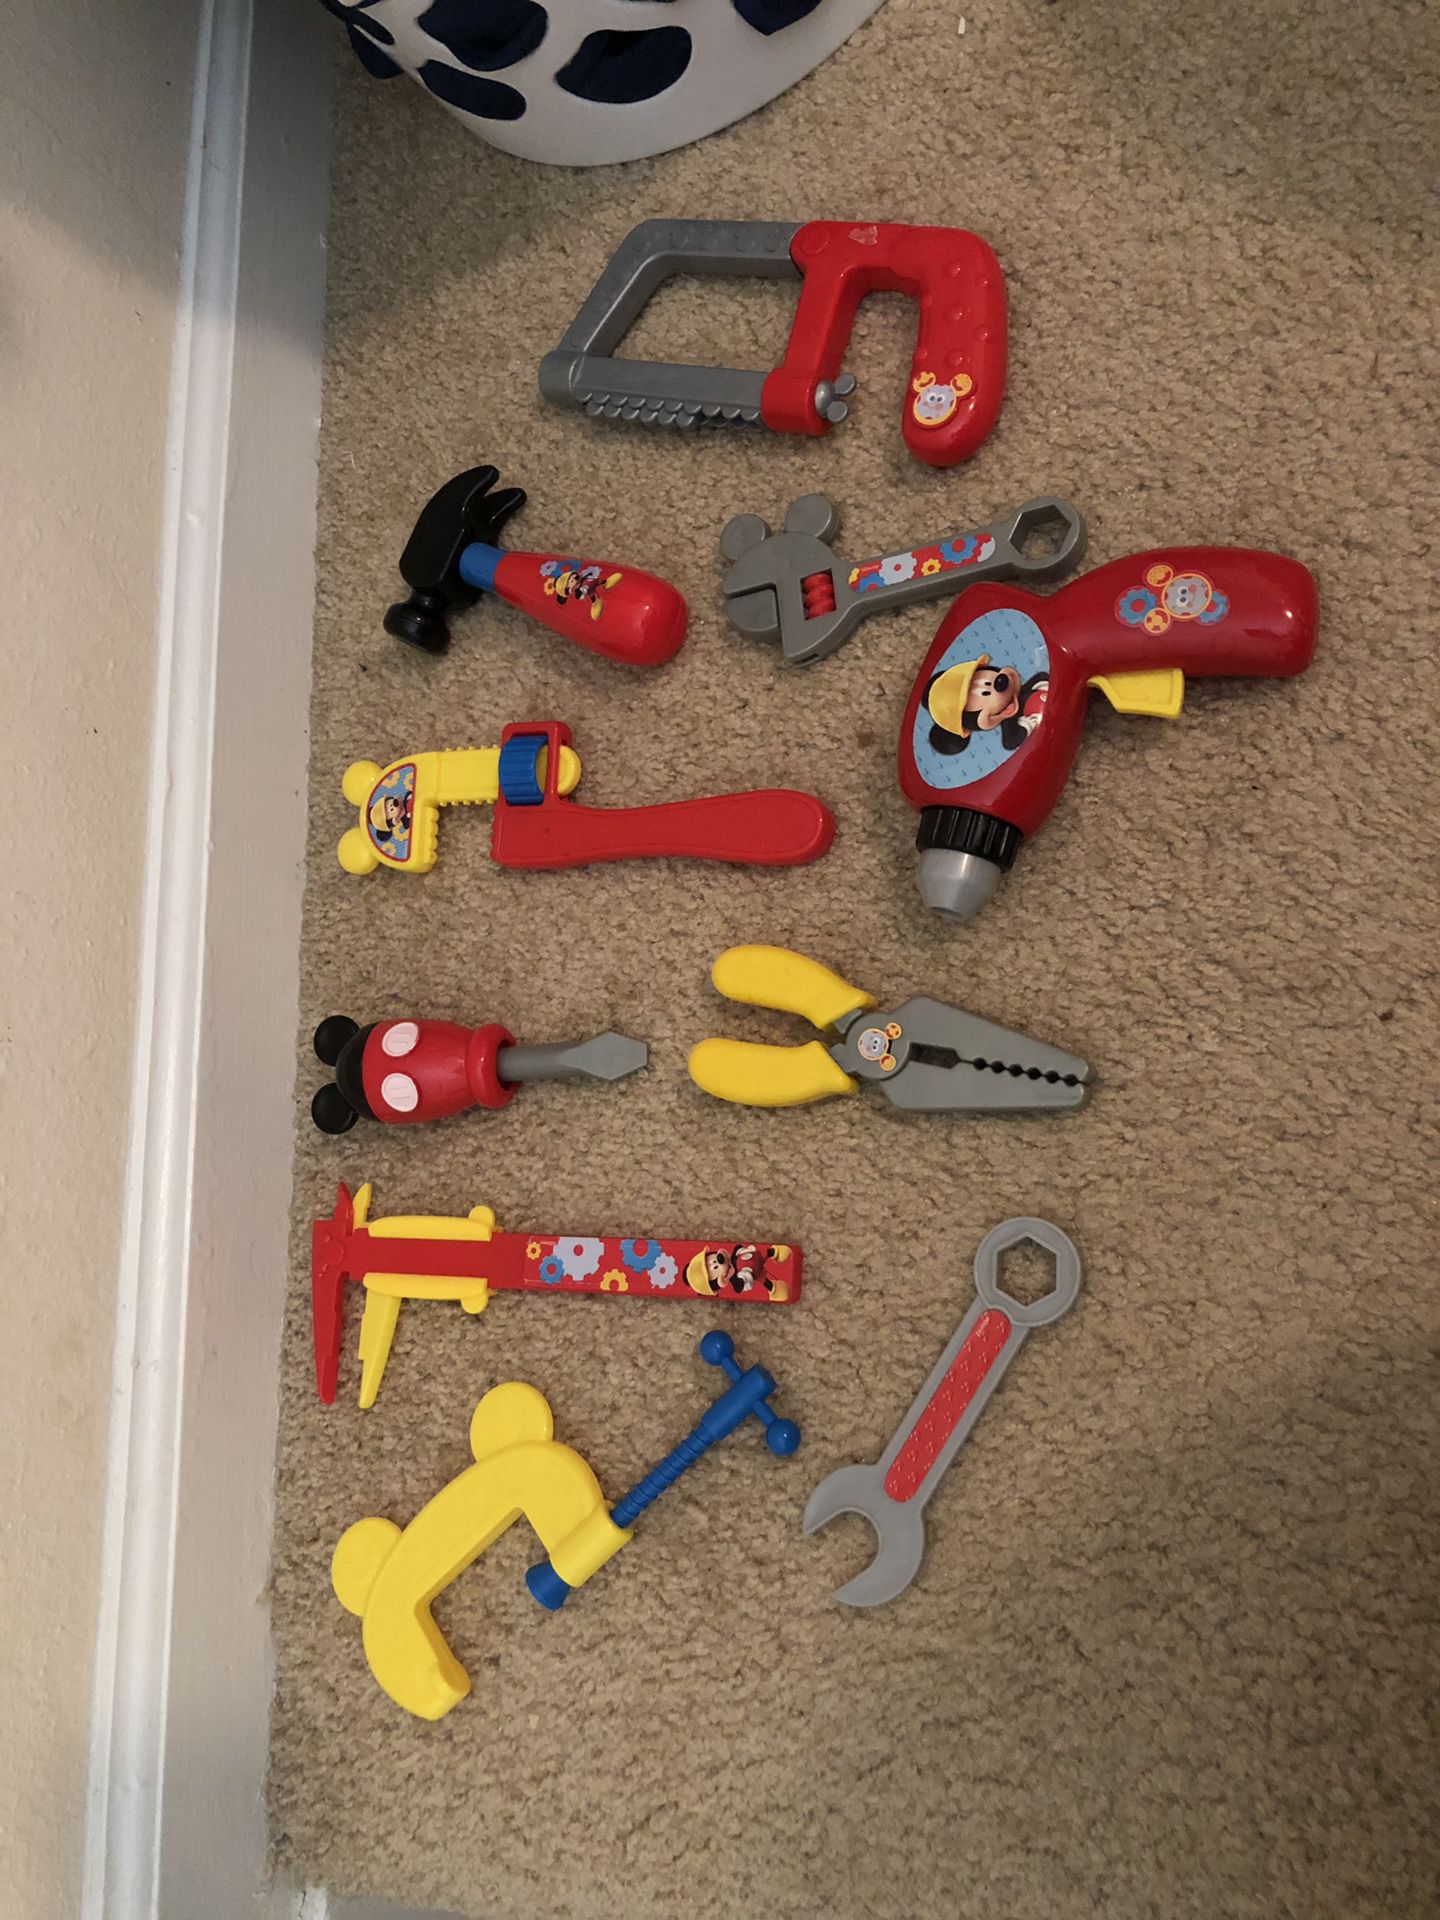 Mickey Mouse tool set